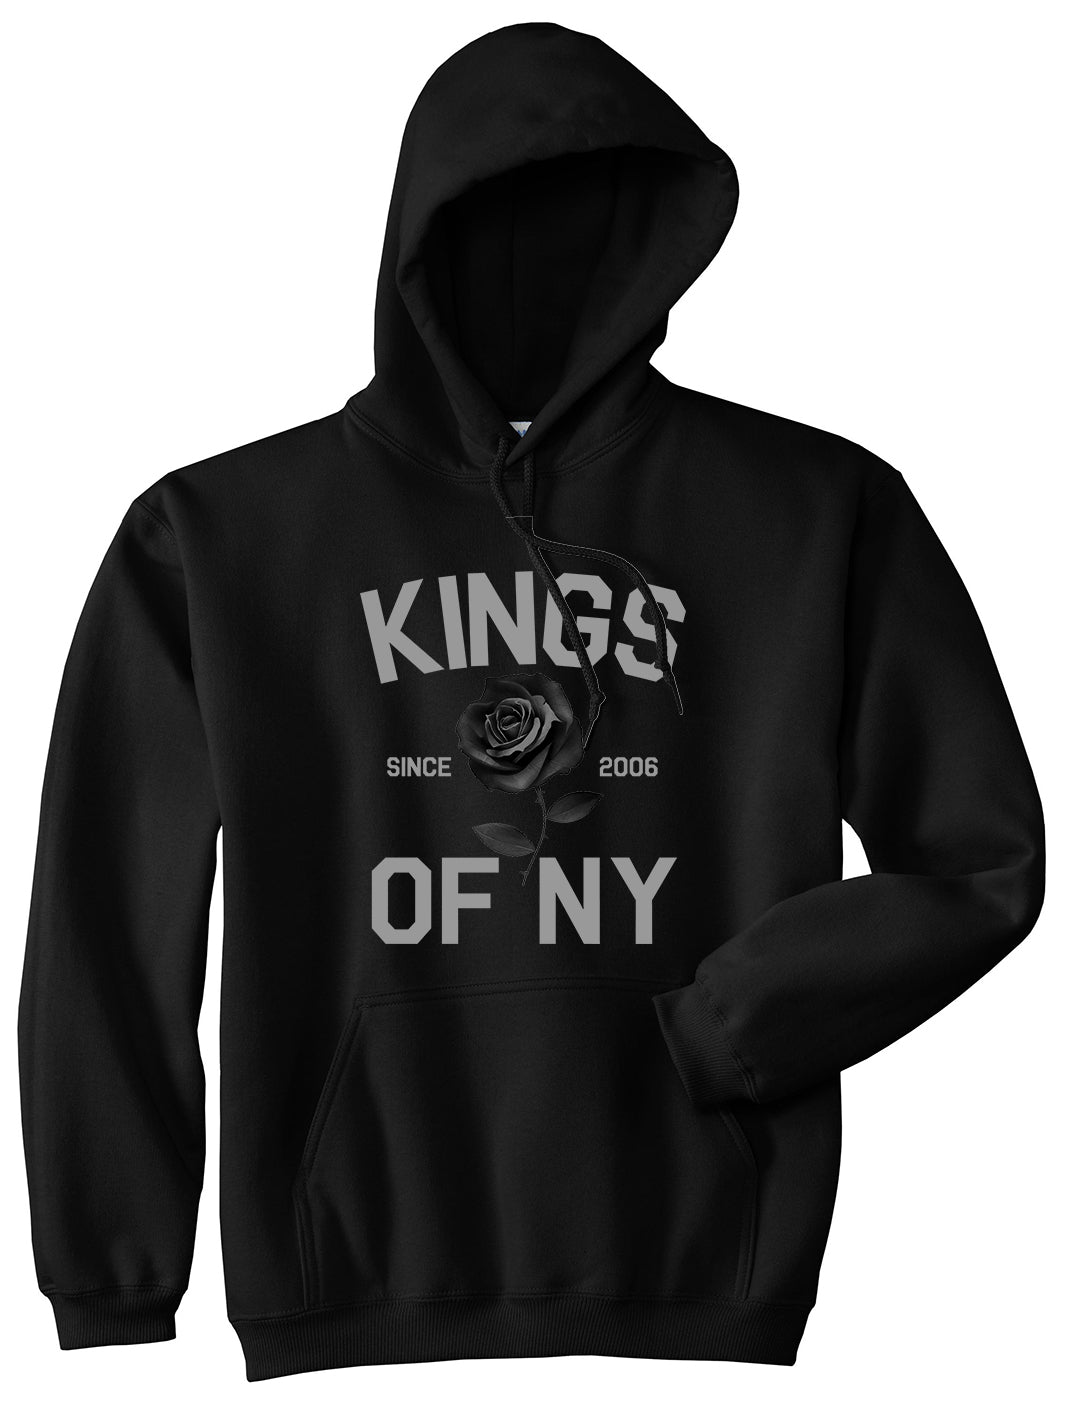 Black Rose Since 2006 Mens Pullover Hoodie Black by Kings Of NY